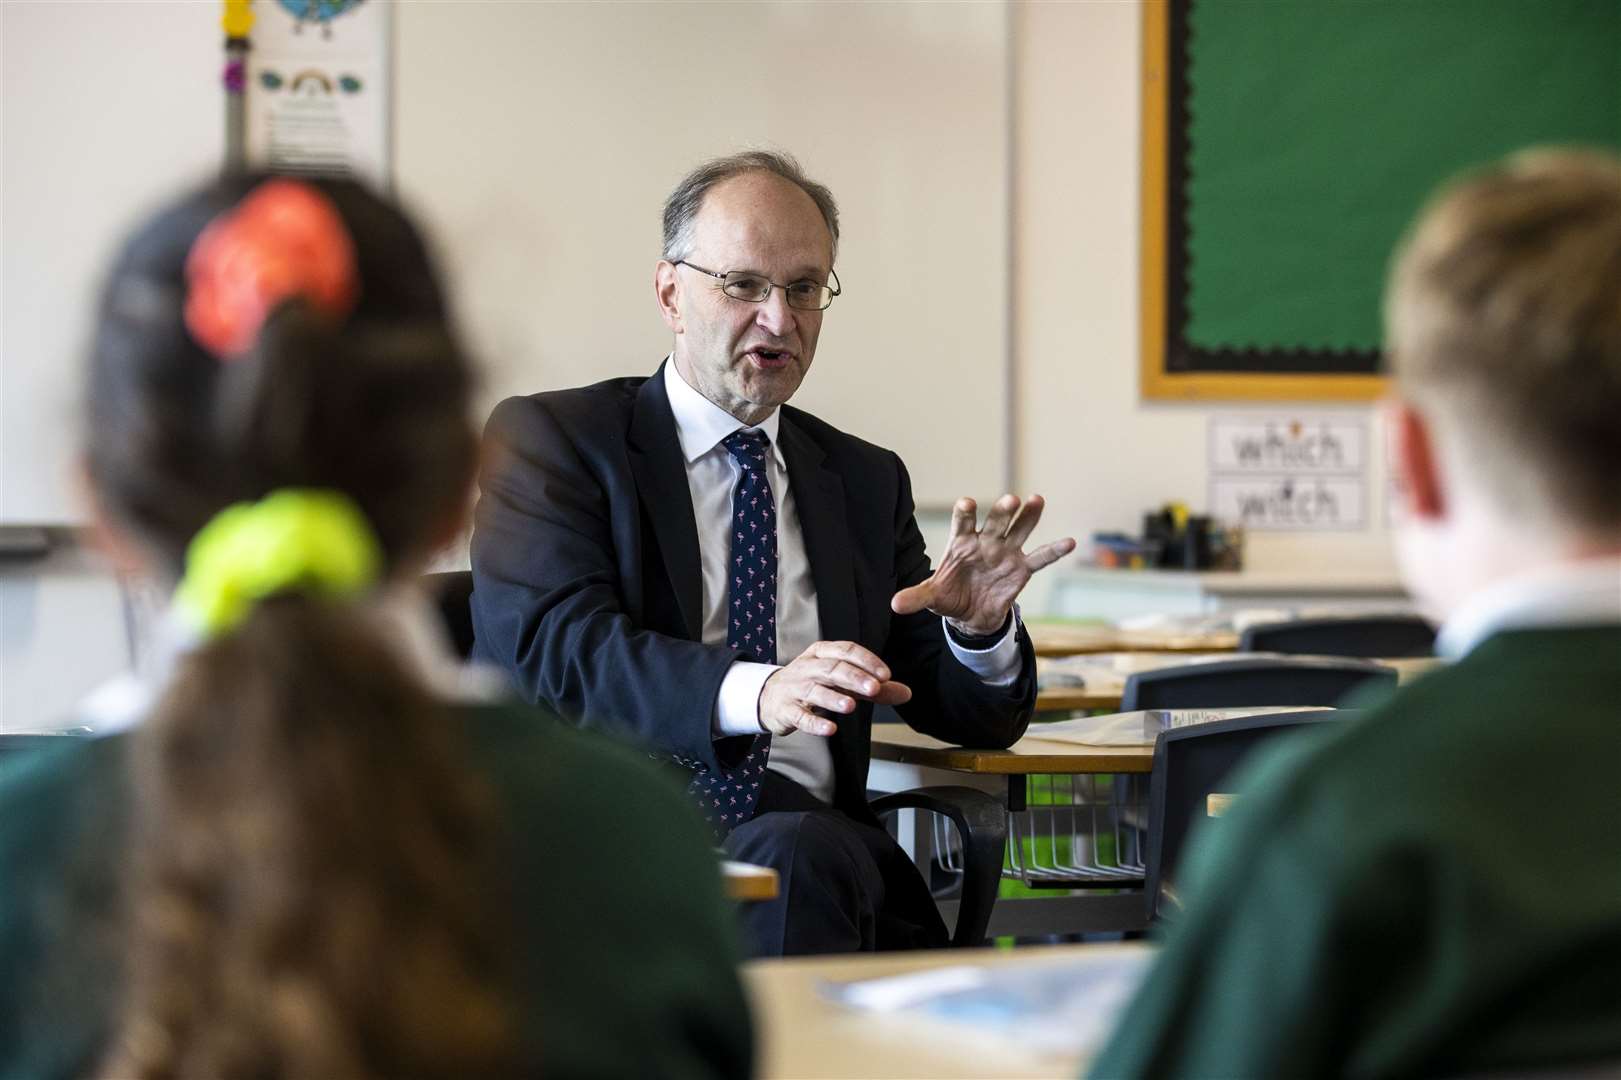 Education minister Peter Weir meets pupils on the student council at St Joesph’s Primary School in Carryduff, Belfast (Liam McBurney/PA)